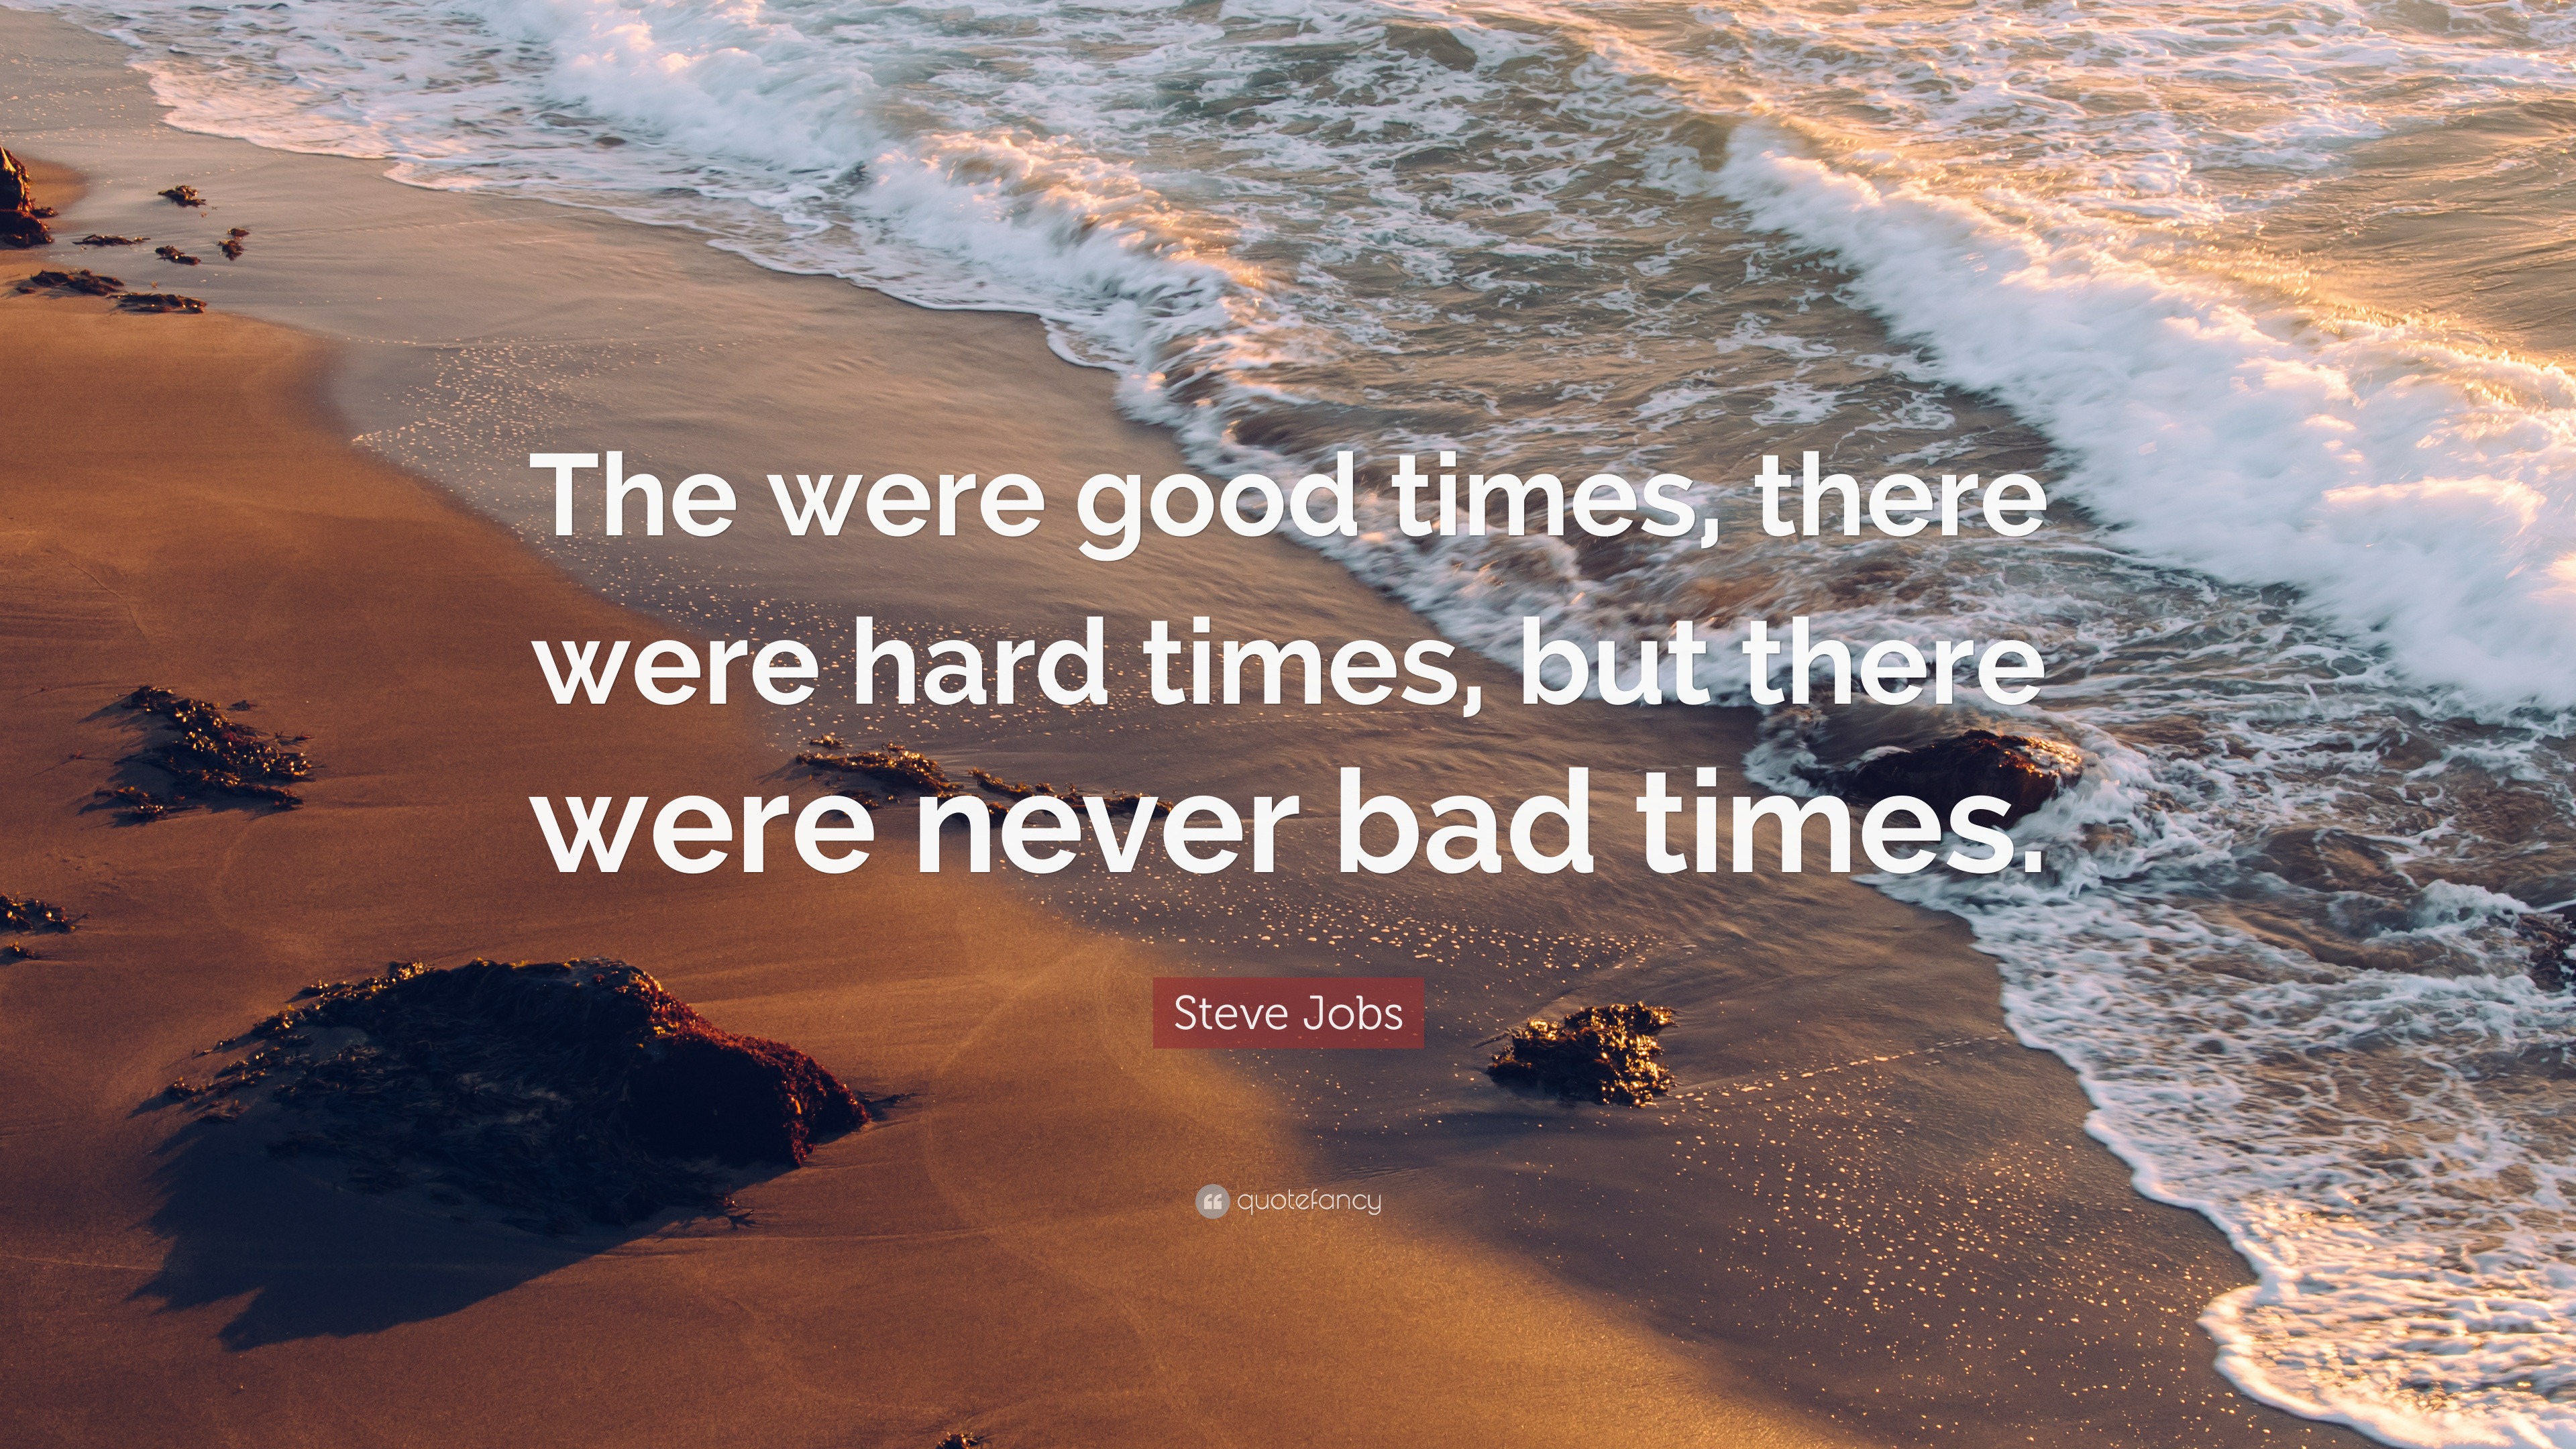 Steve Jobs Quote: “The were good times, there were hard times, but